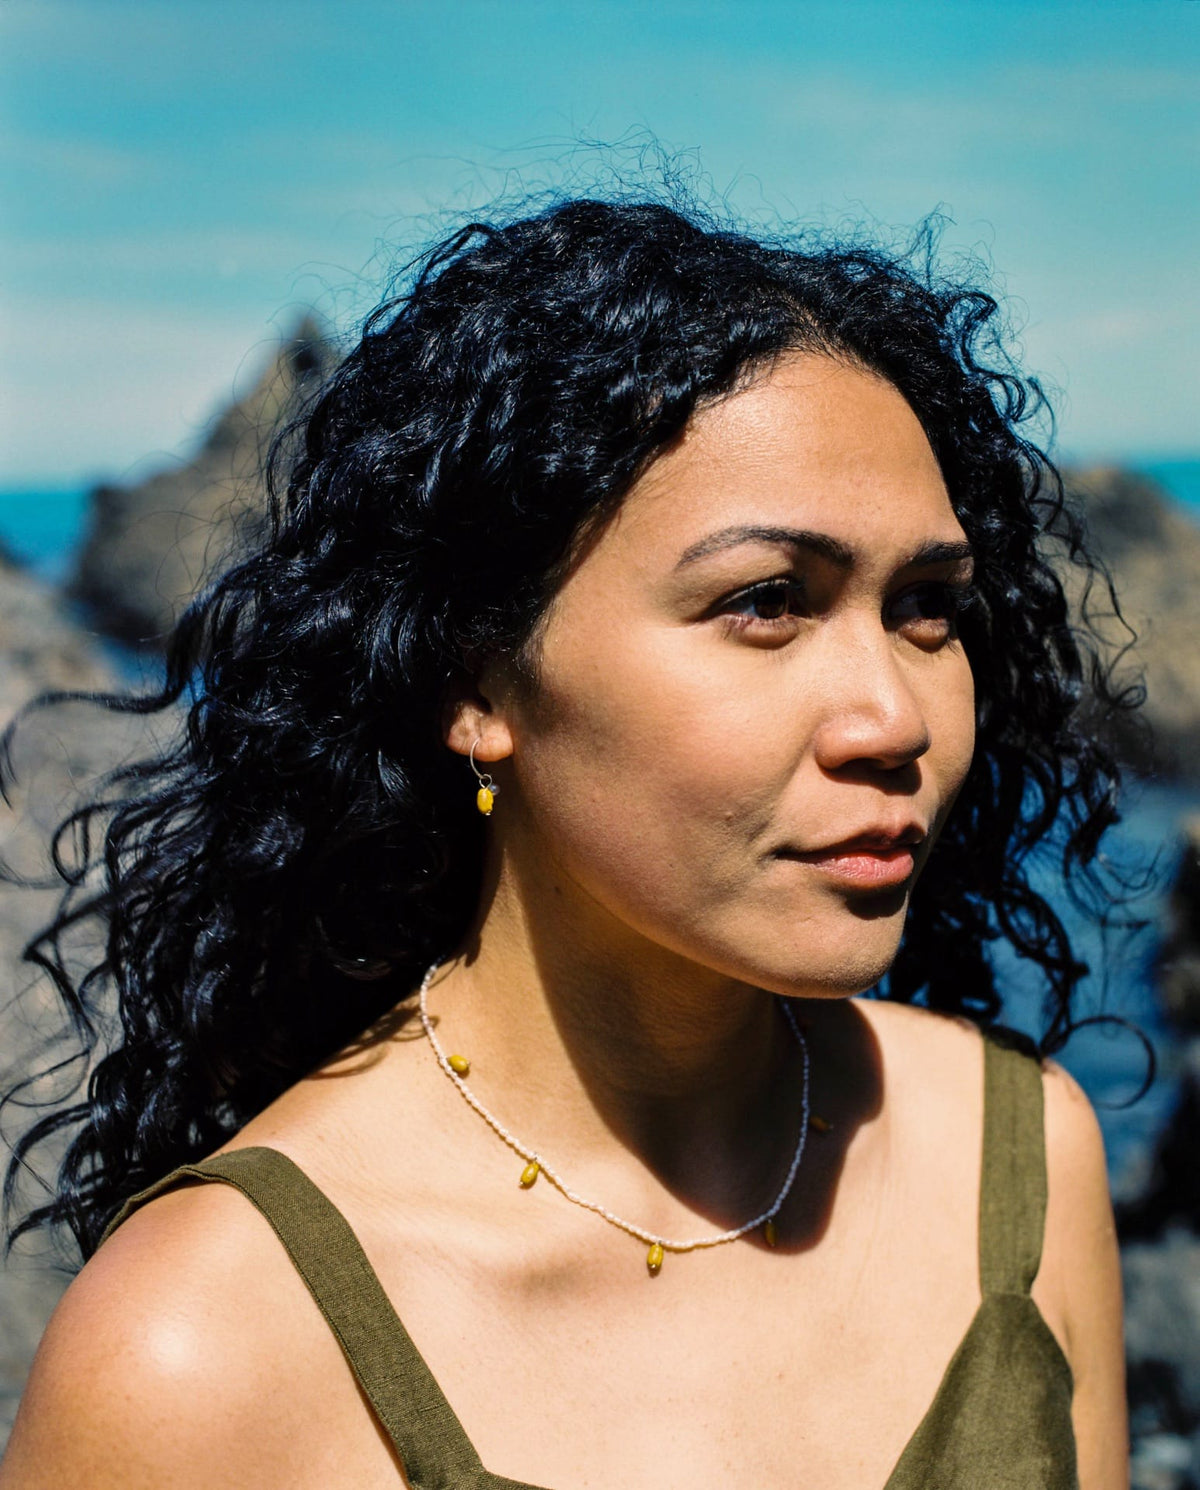 A woman with curly hair wearing Kōwhai Sleepers by Avara Studio, standing in front of the ocean.